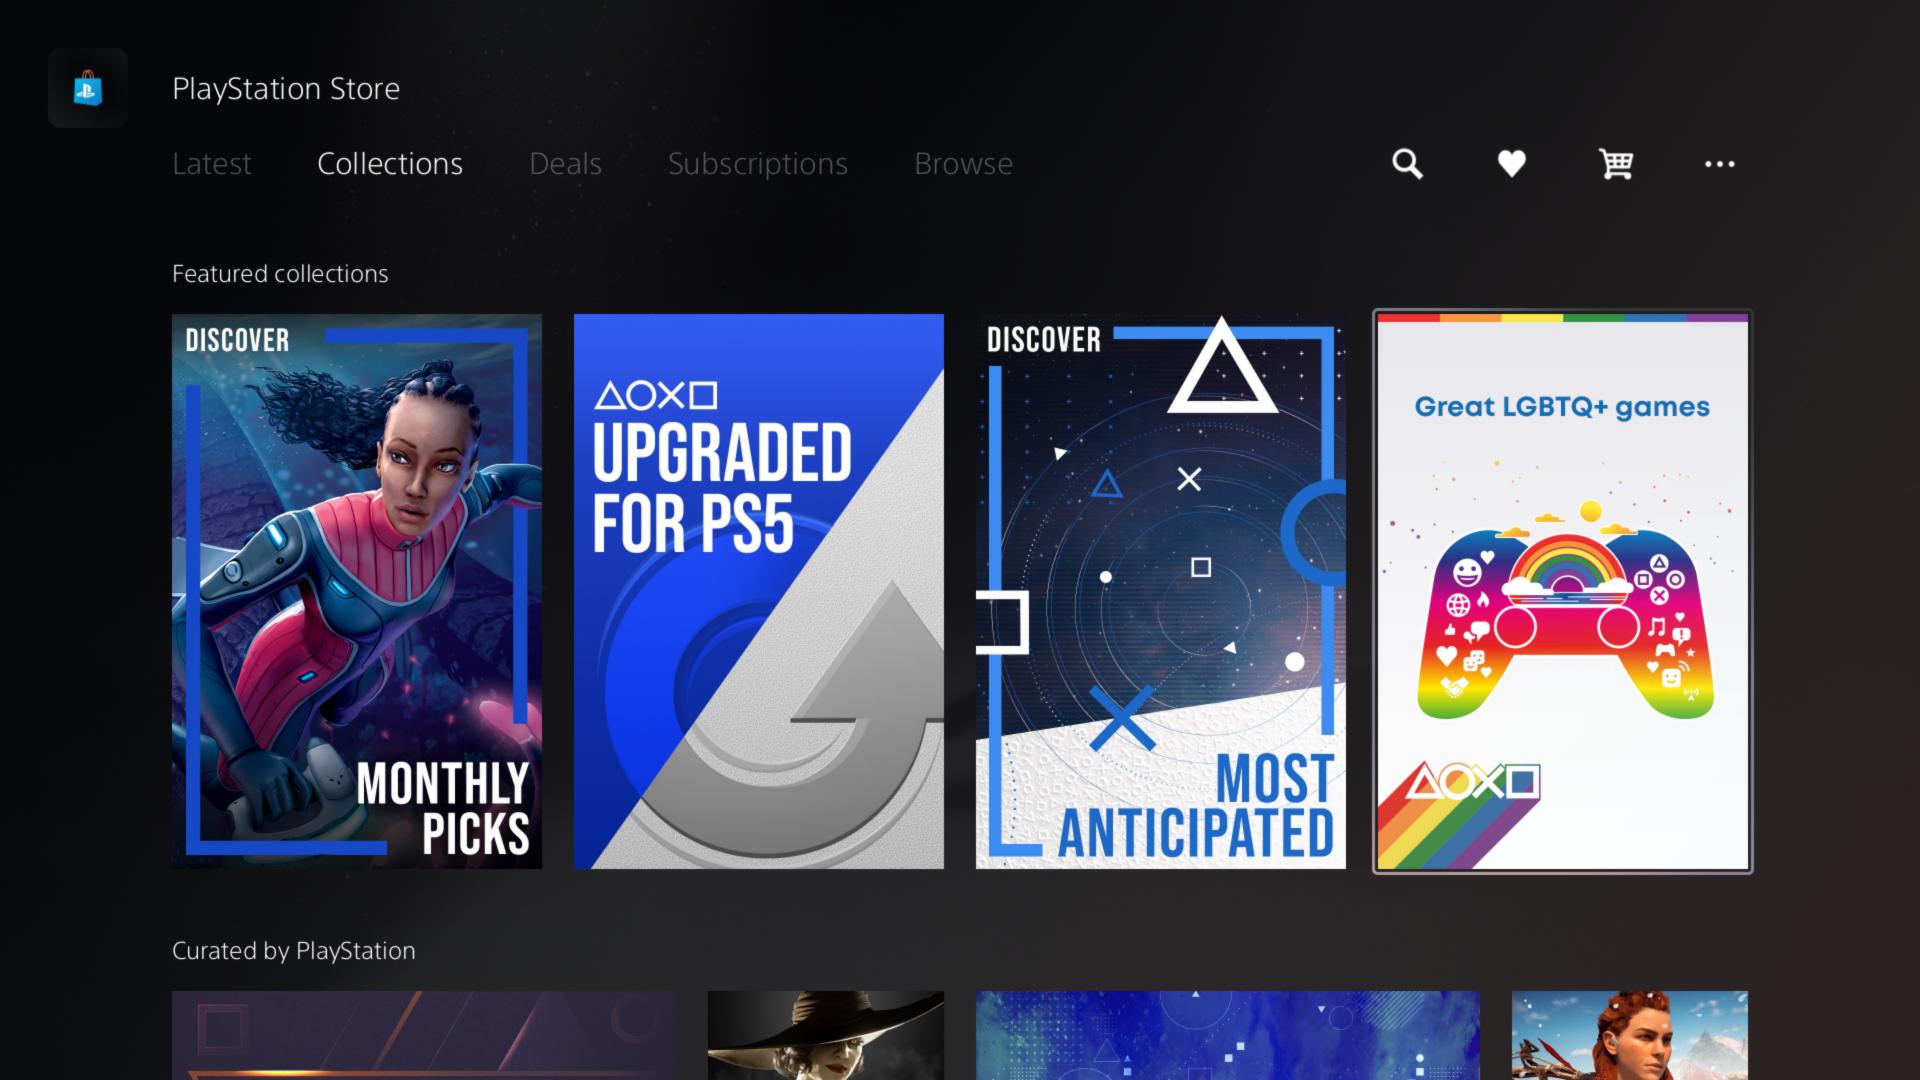 The PlayStation Store introduces a collection full of great LGBTQ+ games -  Gayming Magazine